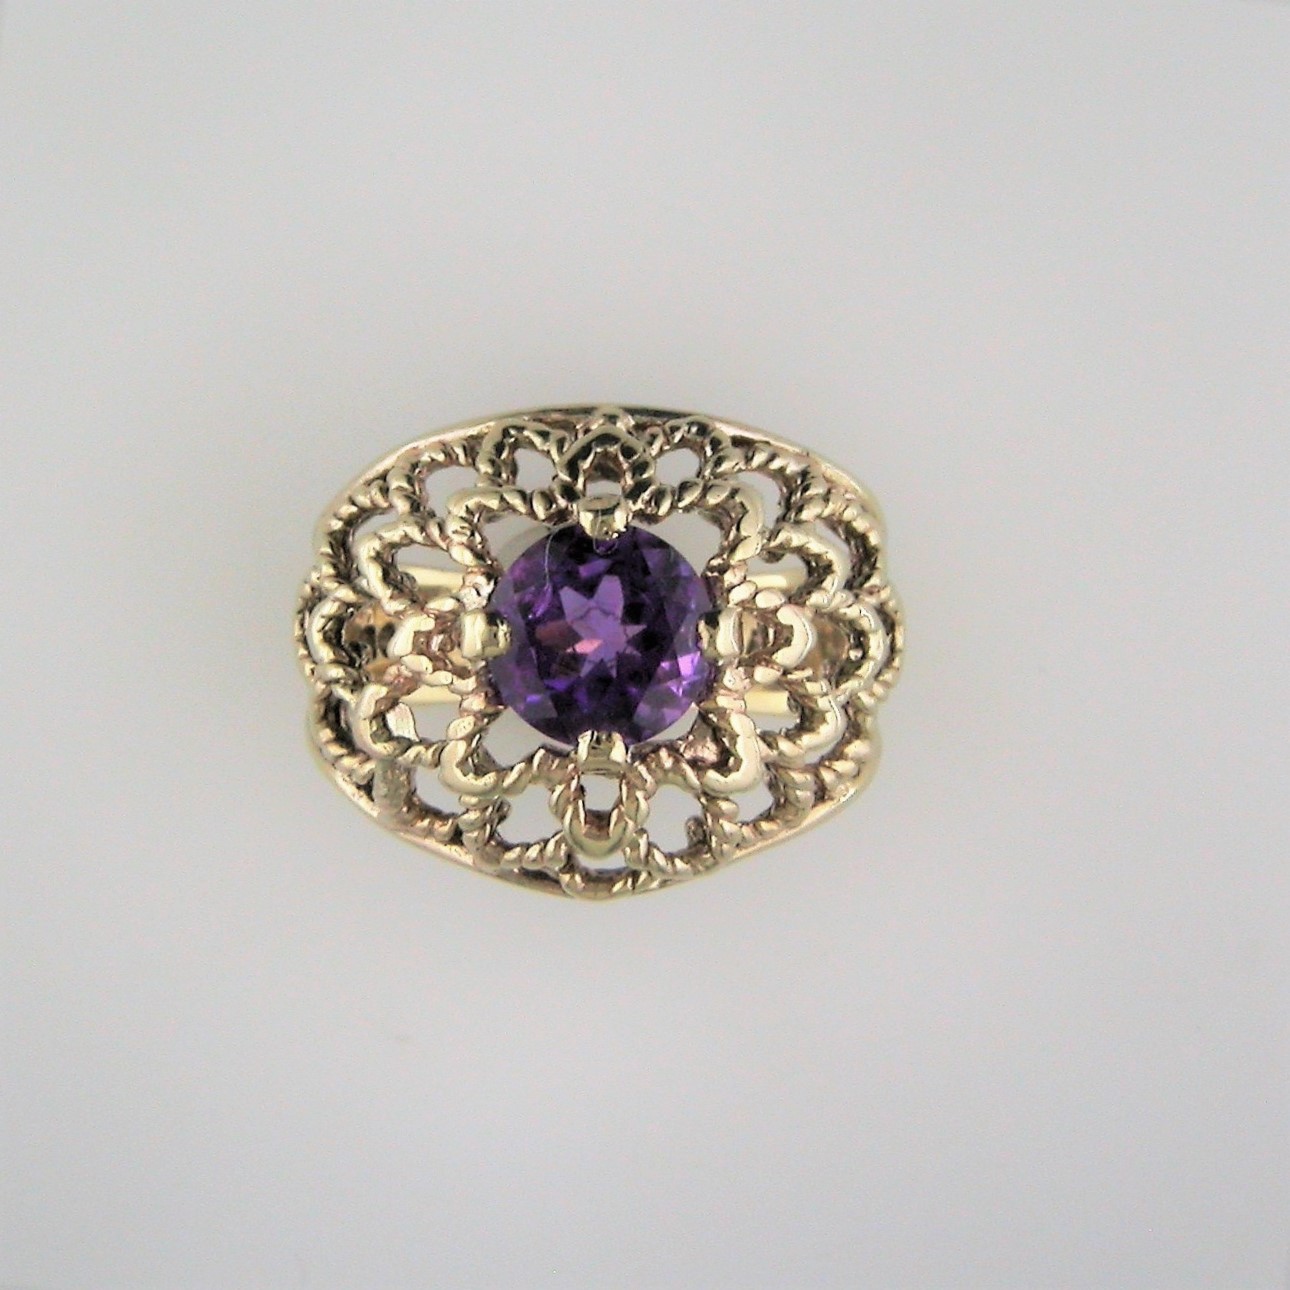 A "Fully Restored" Bombe Style Ring Ste - 7mm Round Amethyst. - Image 2 of 3